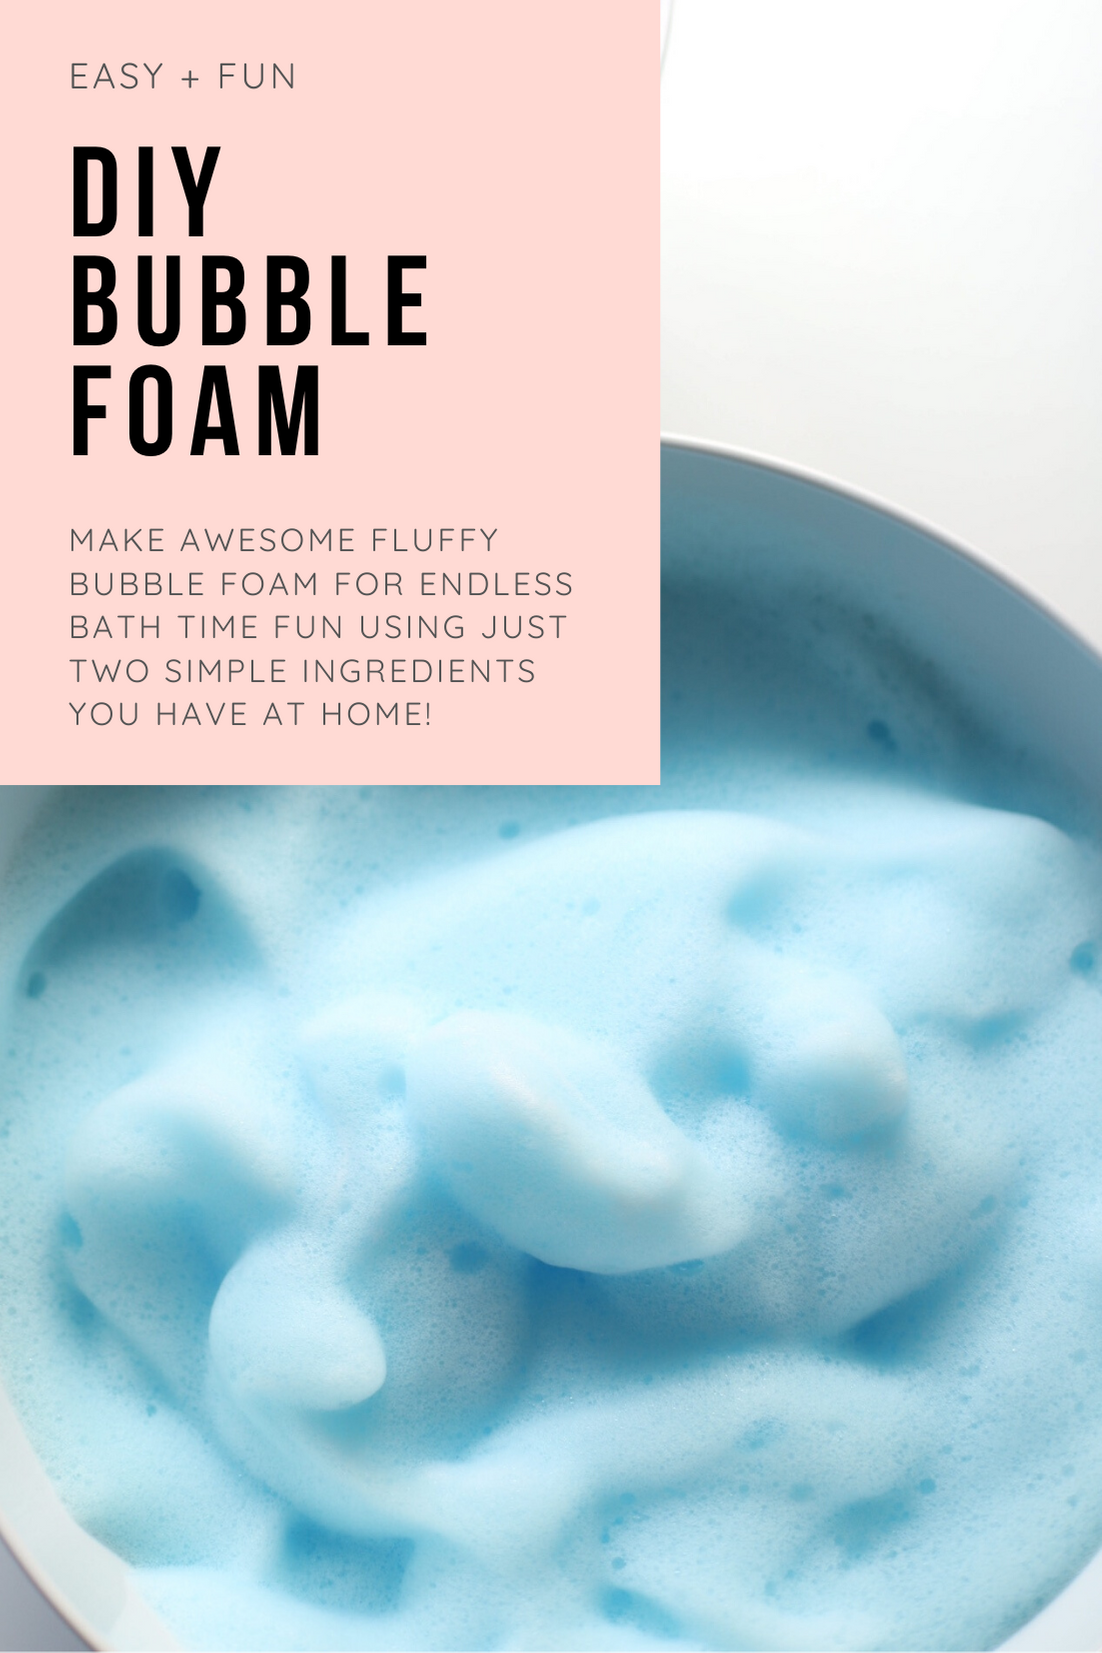 Make your own super fluffy DIY bubble foam (our kids call it bath snow) and watch the bath time magic unfold! Make your DIY bubble foam extra colorful or keep it white as snow. Either way, kids will love this awesome and easy activity made using just two ingredients you definitely have at home! Click through for the recipe. | glitterinc.com | @glitterinc